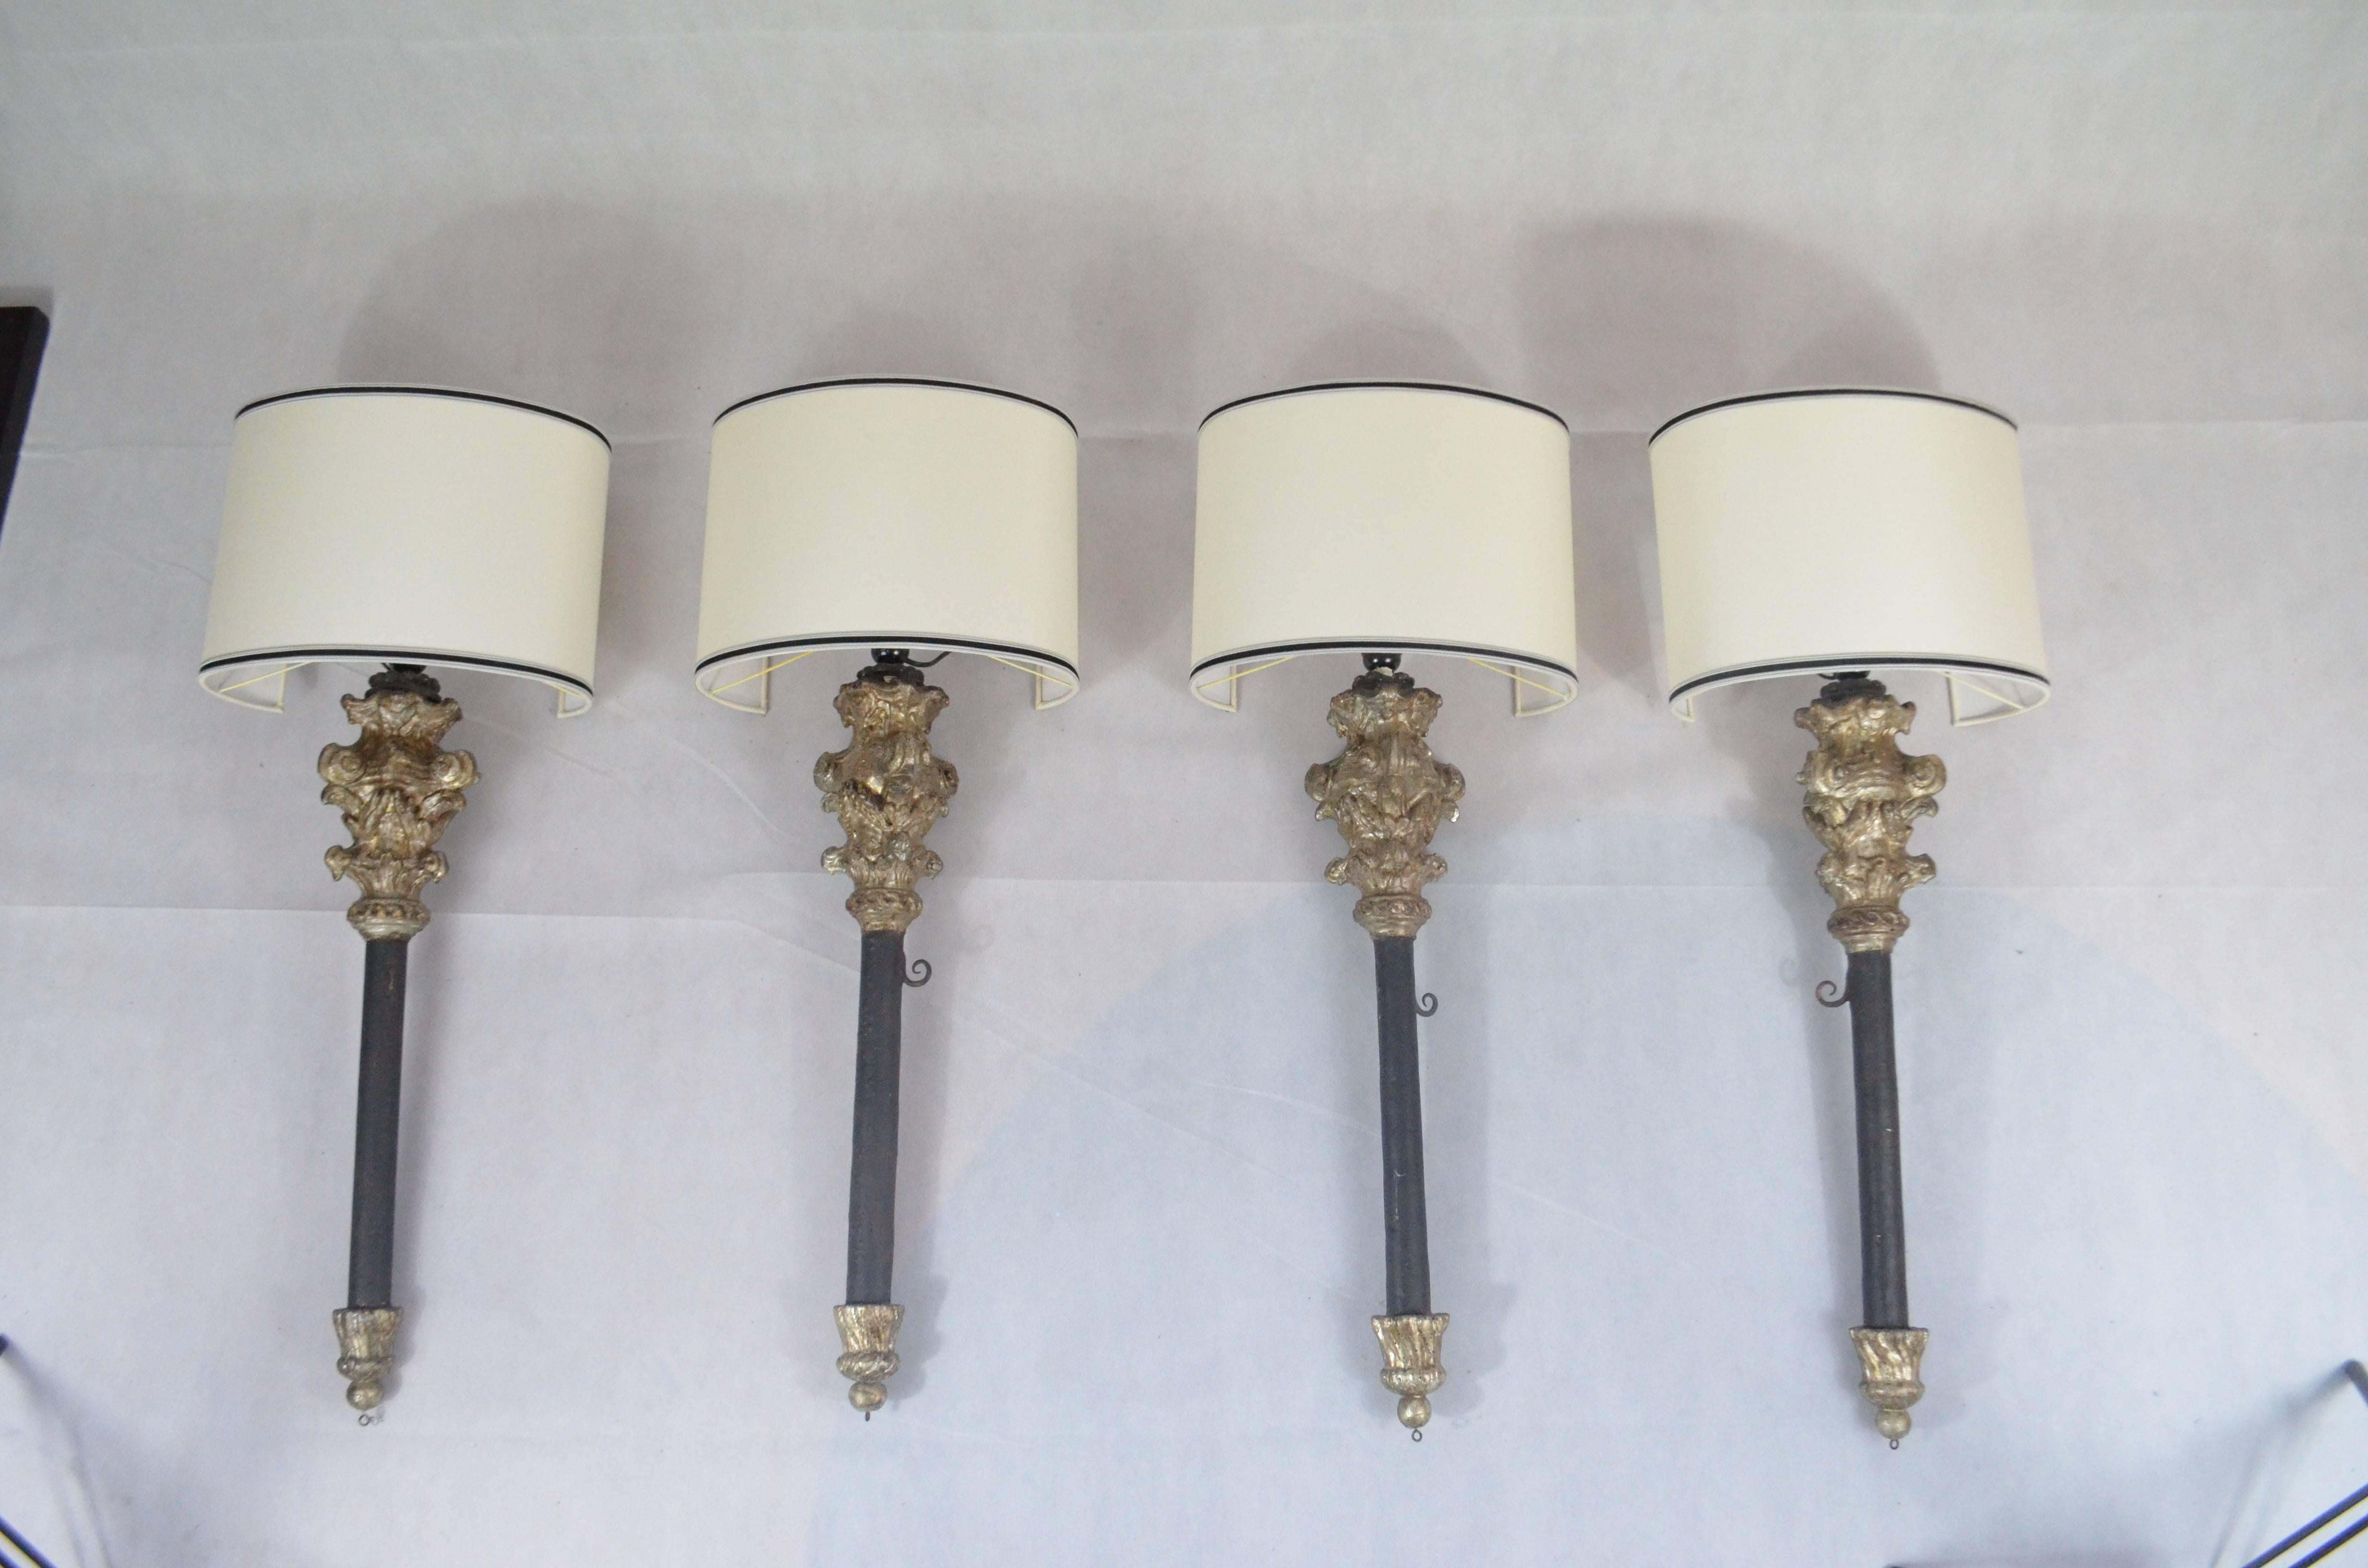 Two Louis XV, Italian torch holders finely engraved and decorated with silver leaf and mecca details. The central bar is ebonized. We fitted them for electricity, with new wirings and lamp holders. We have restored in a conservative way the wooden